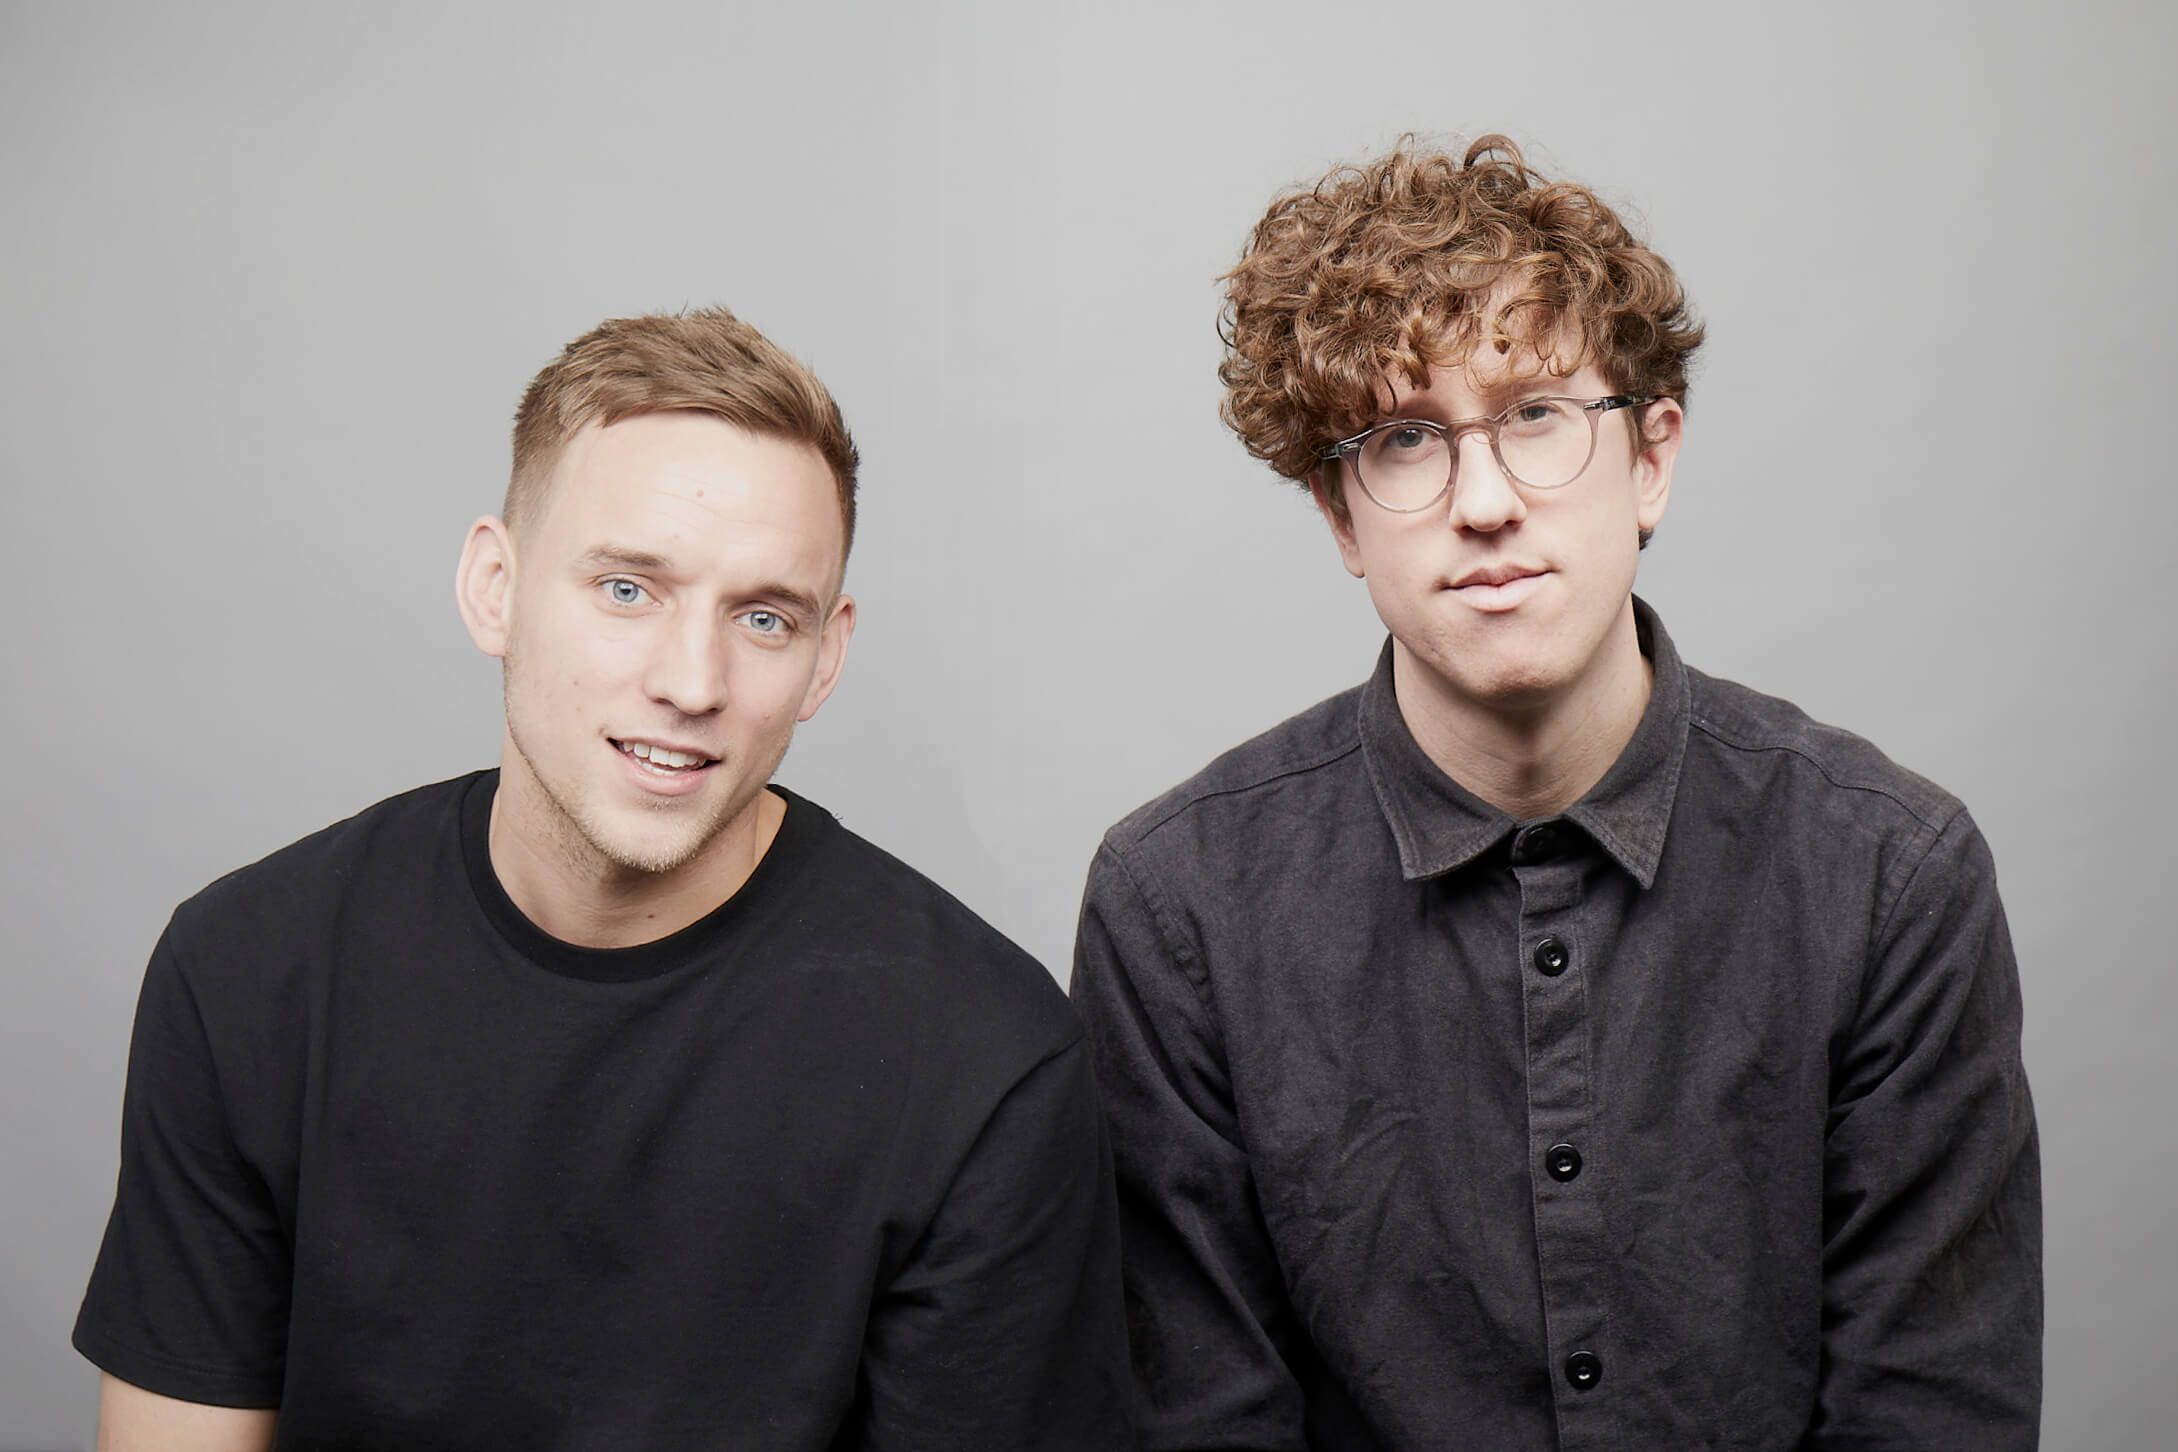 James Hudson and Rob Griffiths step up to Creative Director roles